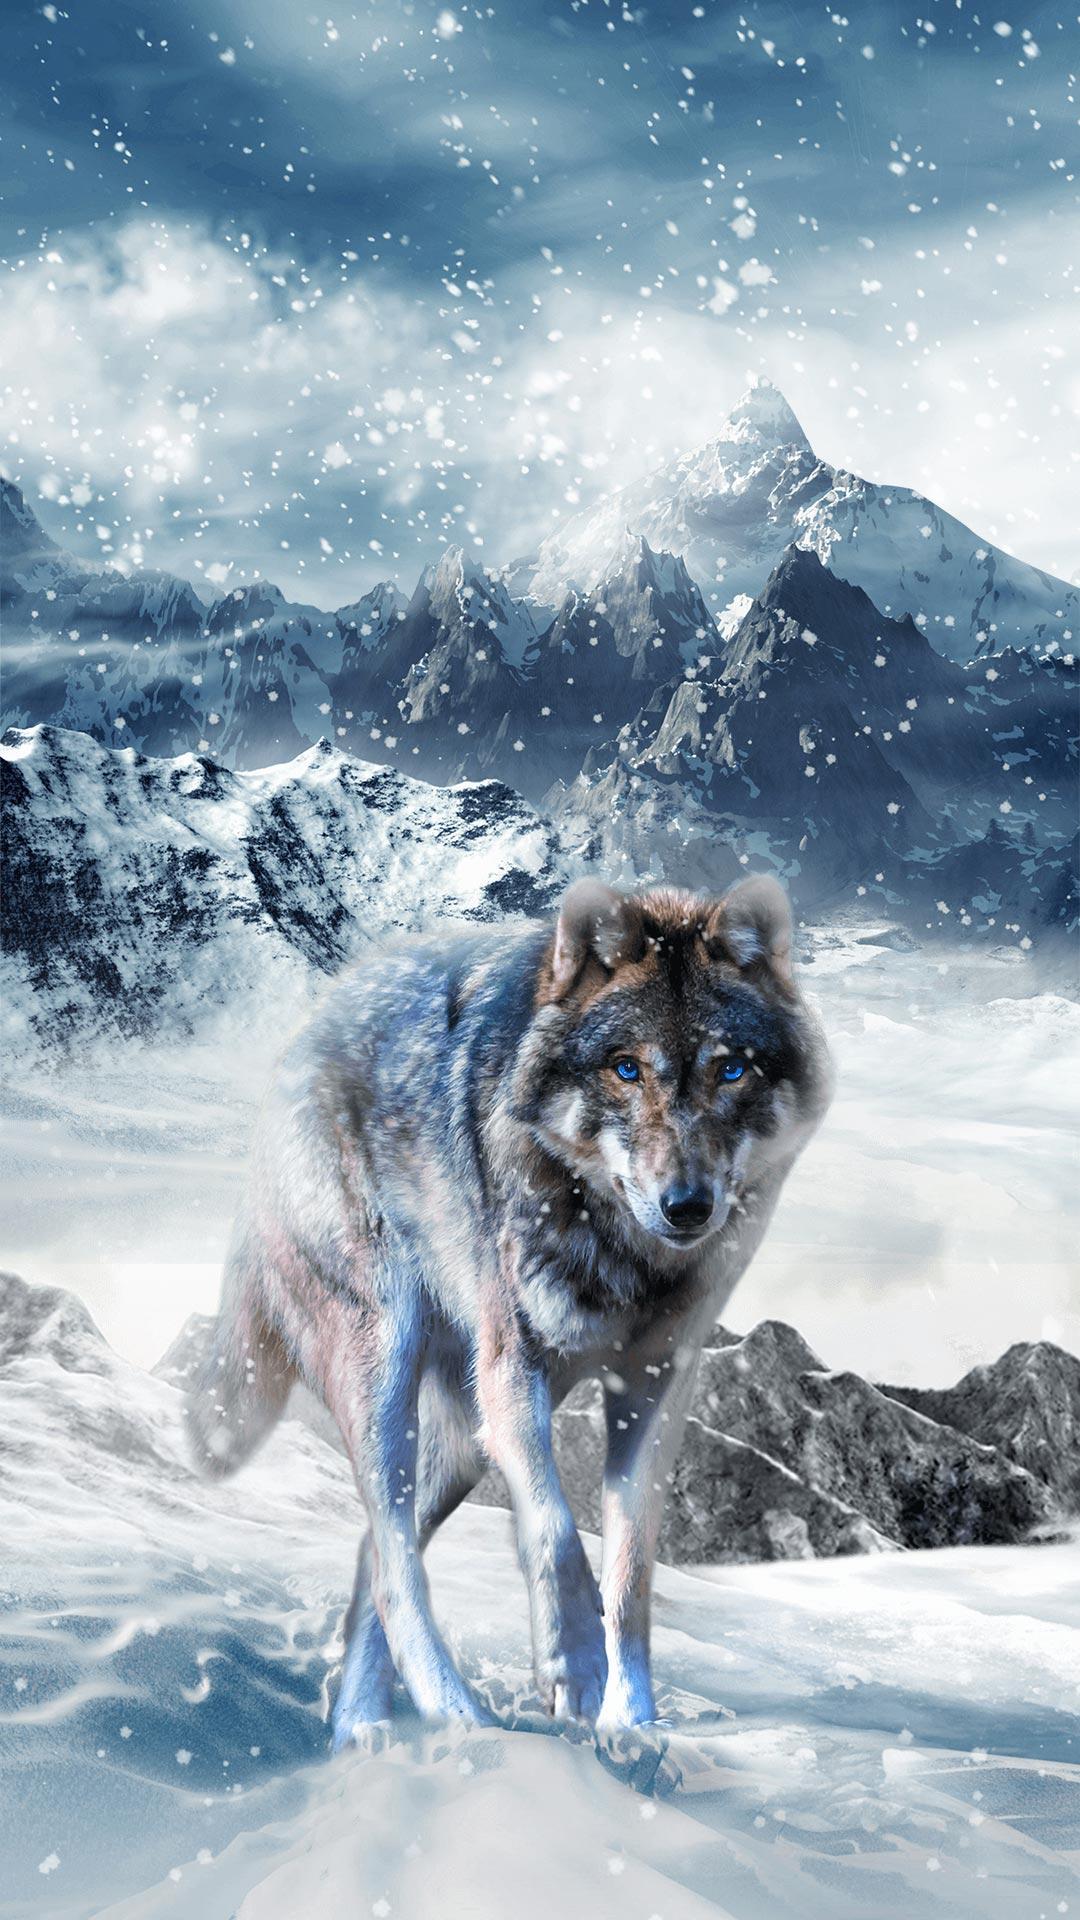 Ice Wolf Live Wallpaper for Android - APK Download